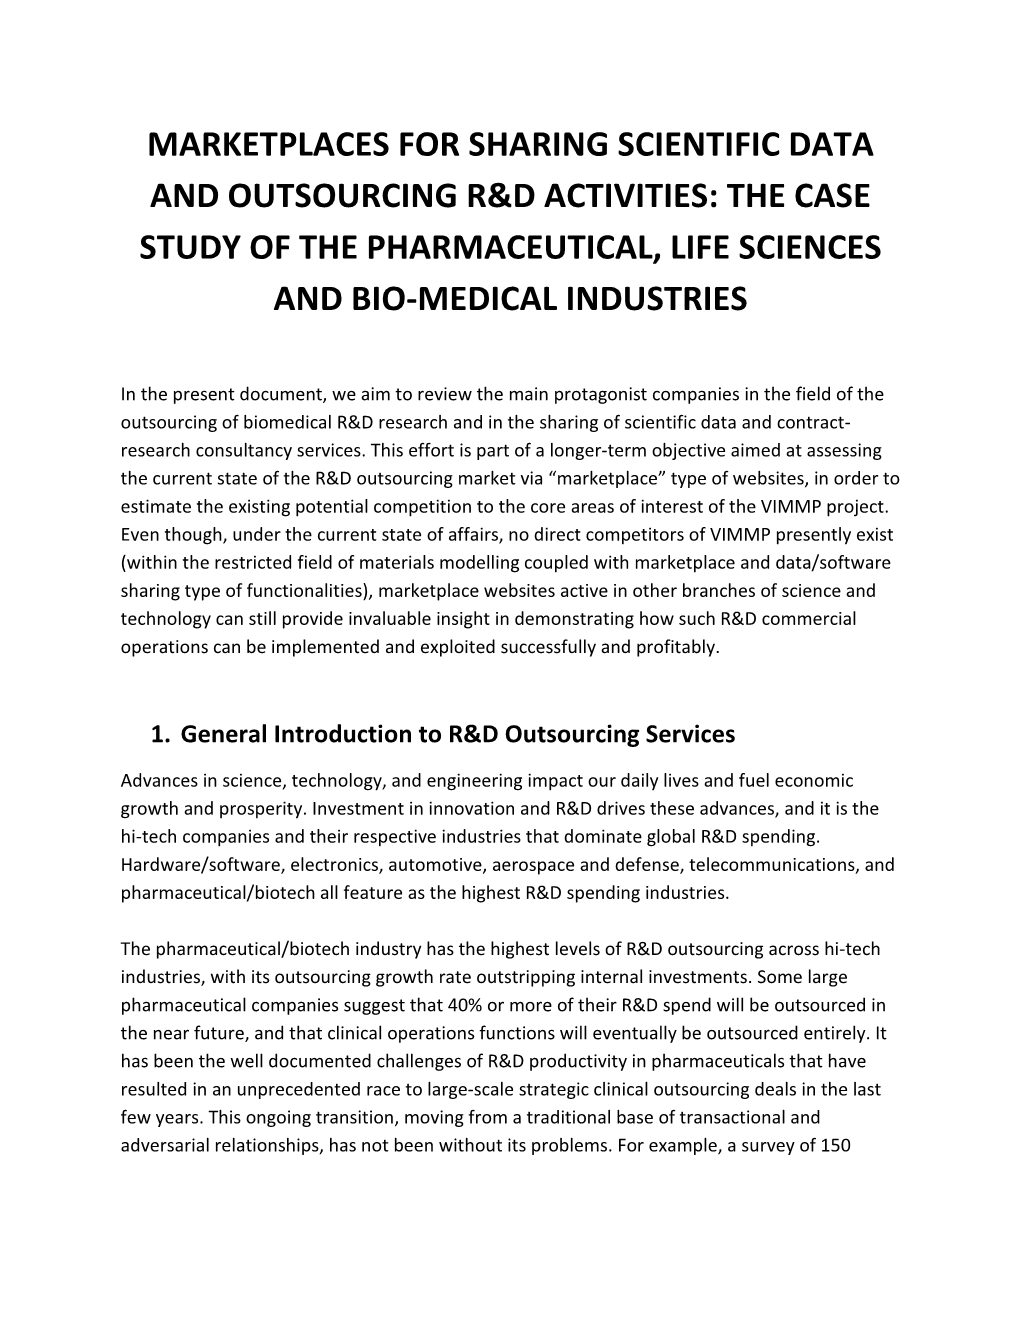 Marketplaces for Sharing Scientific Data and Outsourcing R&D Activities: the Case Study of the Pharmaceutical, Life Sciences and Bio-Medical Industries